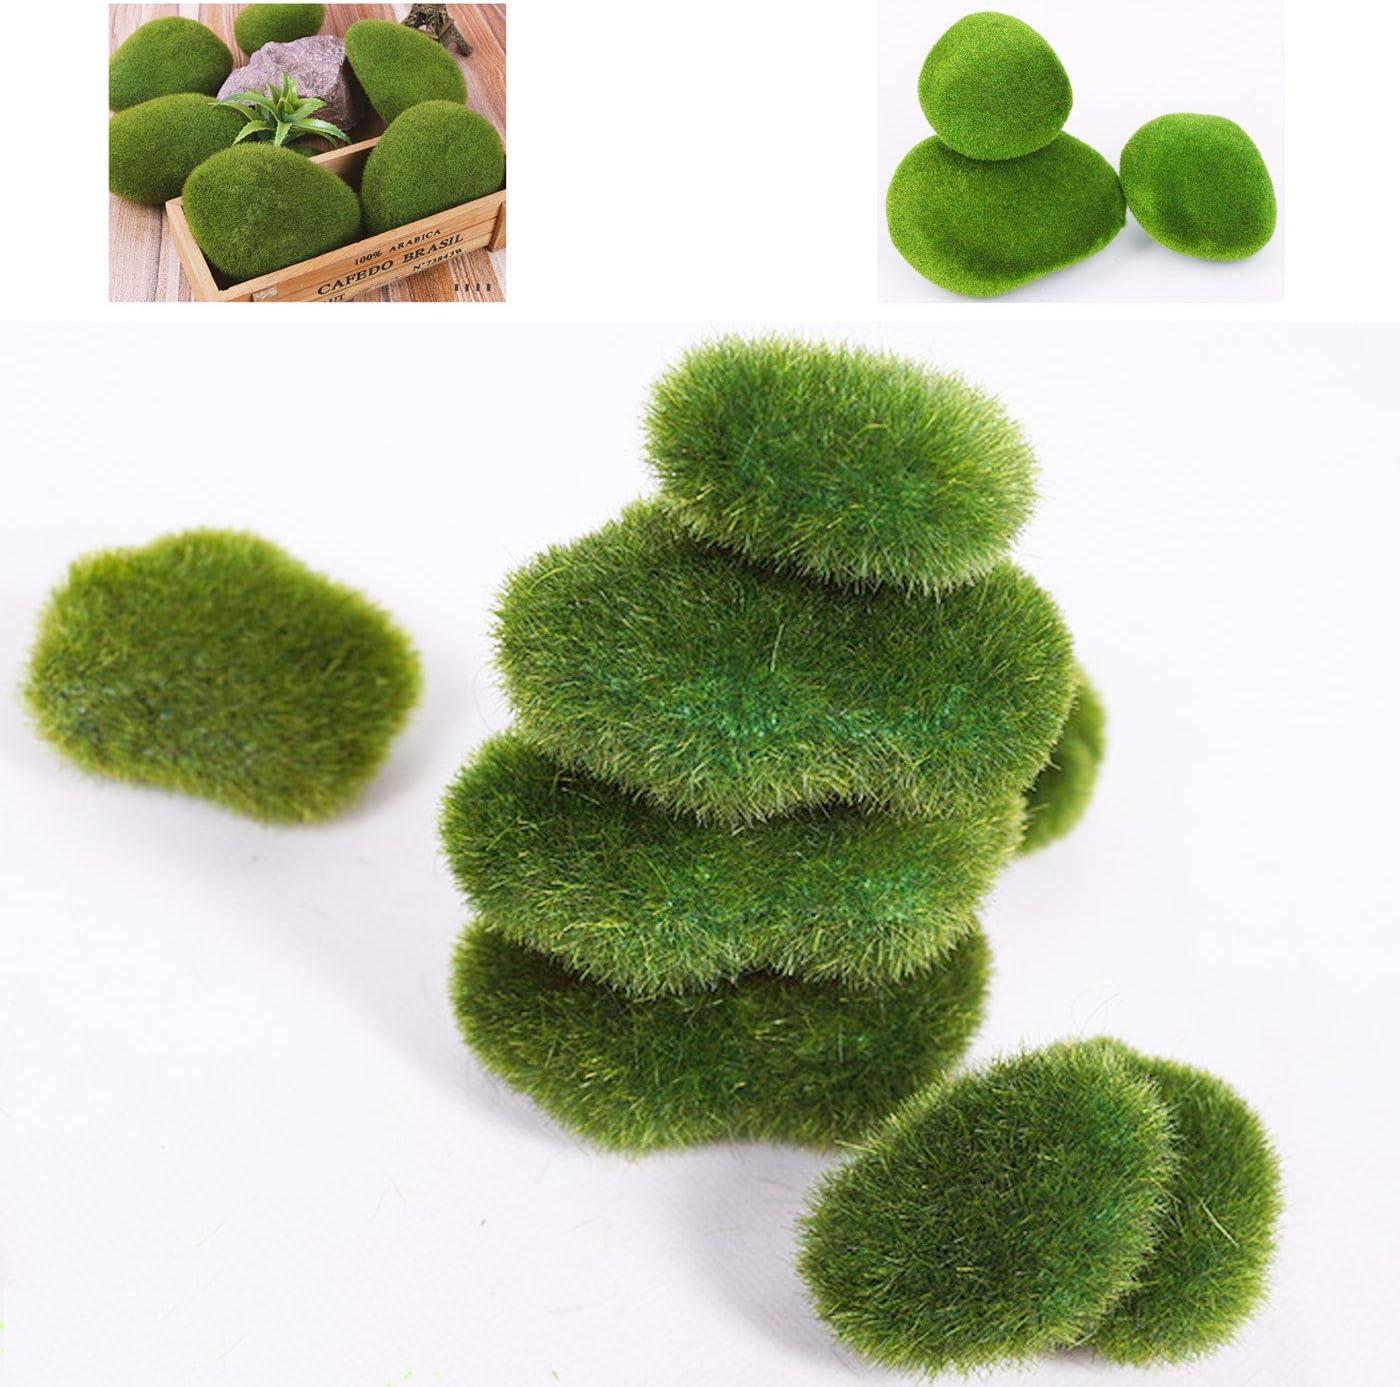 6Pcs Faux Moss Covered Rocks Fake Moss Decor for Floral